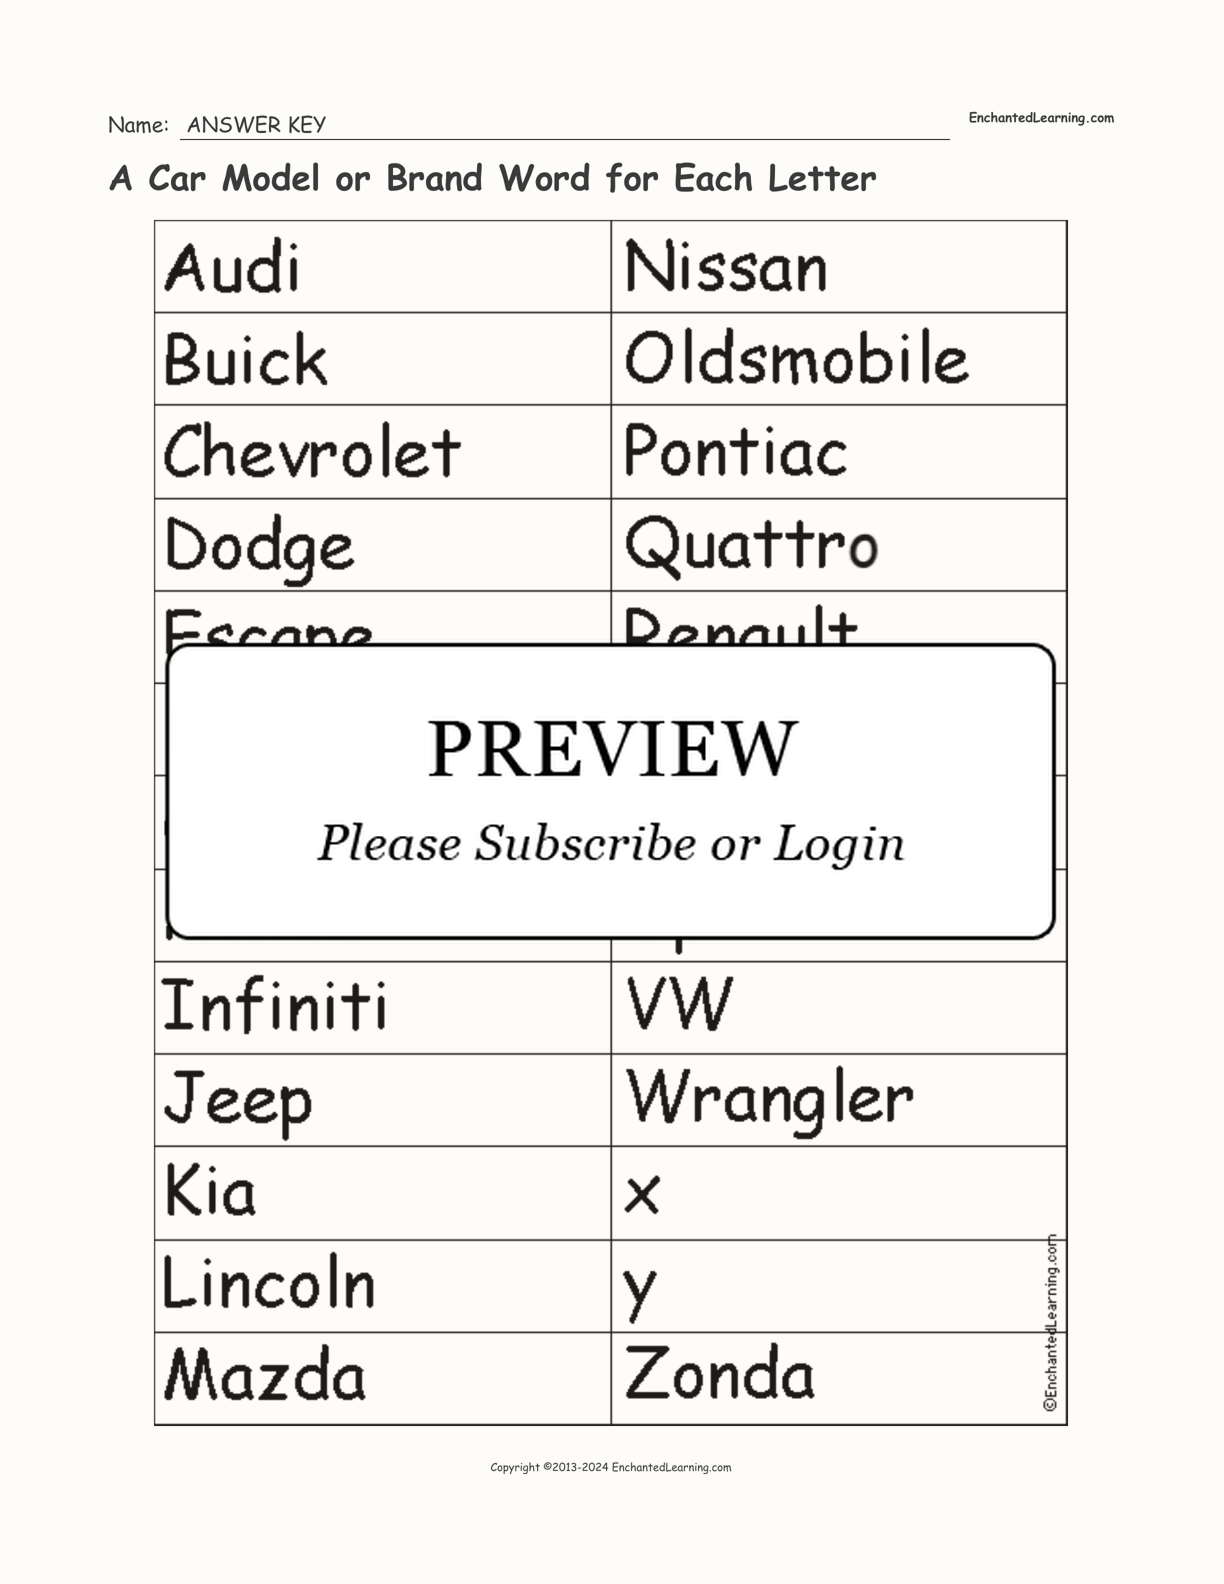 A Car Model or Brand Word for Each Letter interactive worksheet page 2